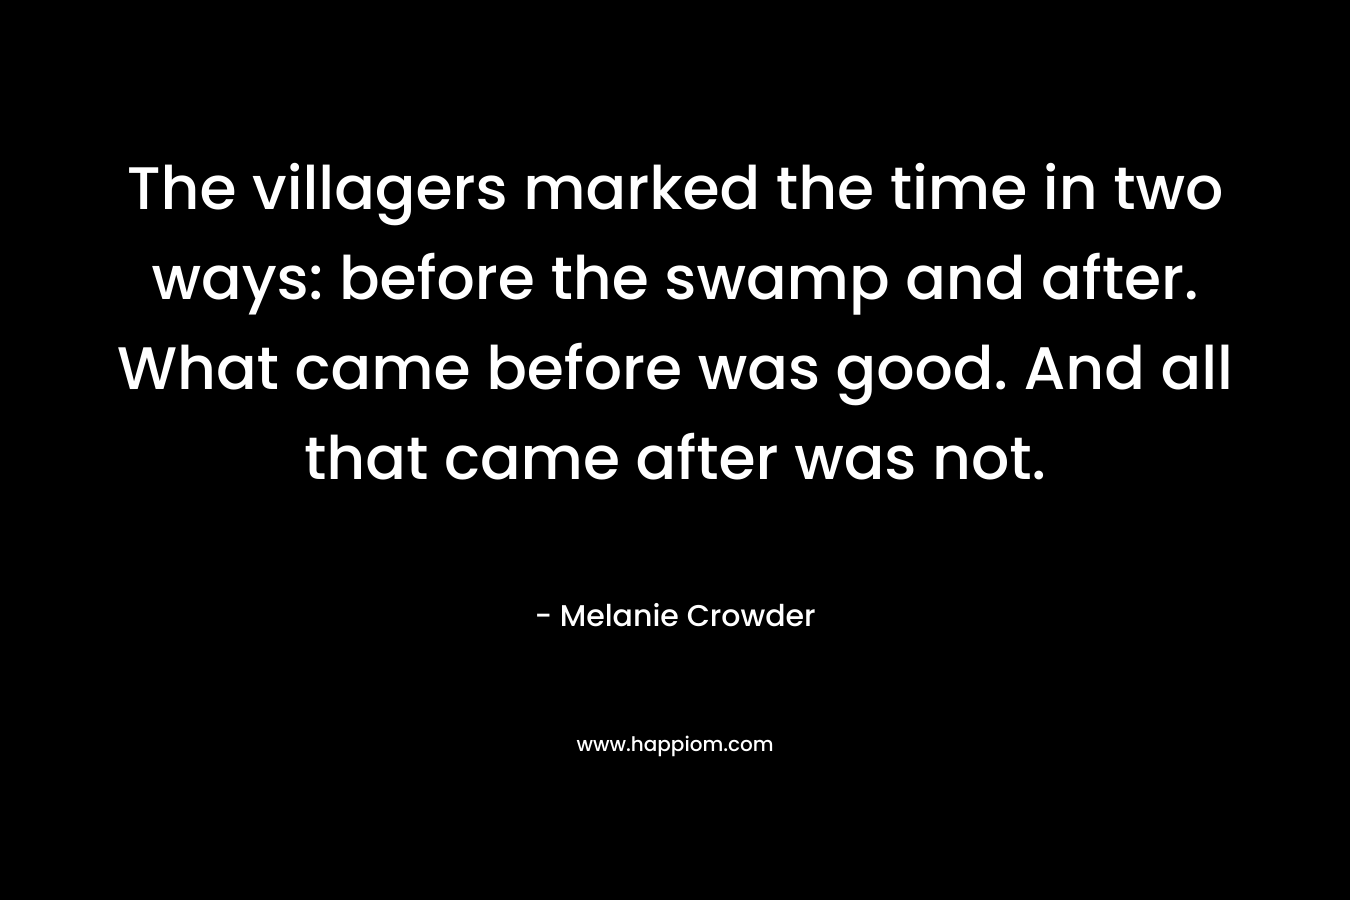 The villagers marked the time in two ways: before the swamp and after. What came before was good. And all that came after was not. – Melanie Crowder